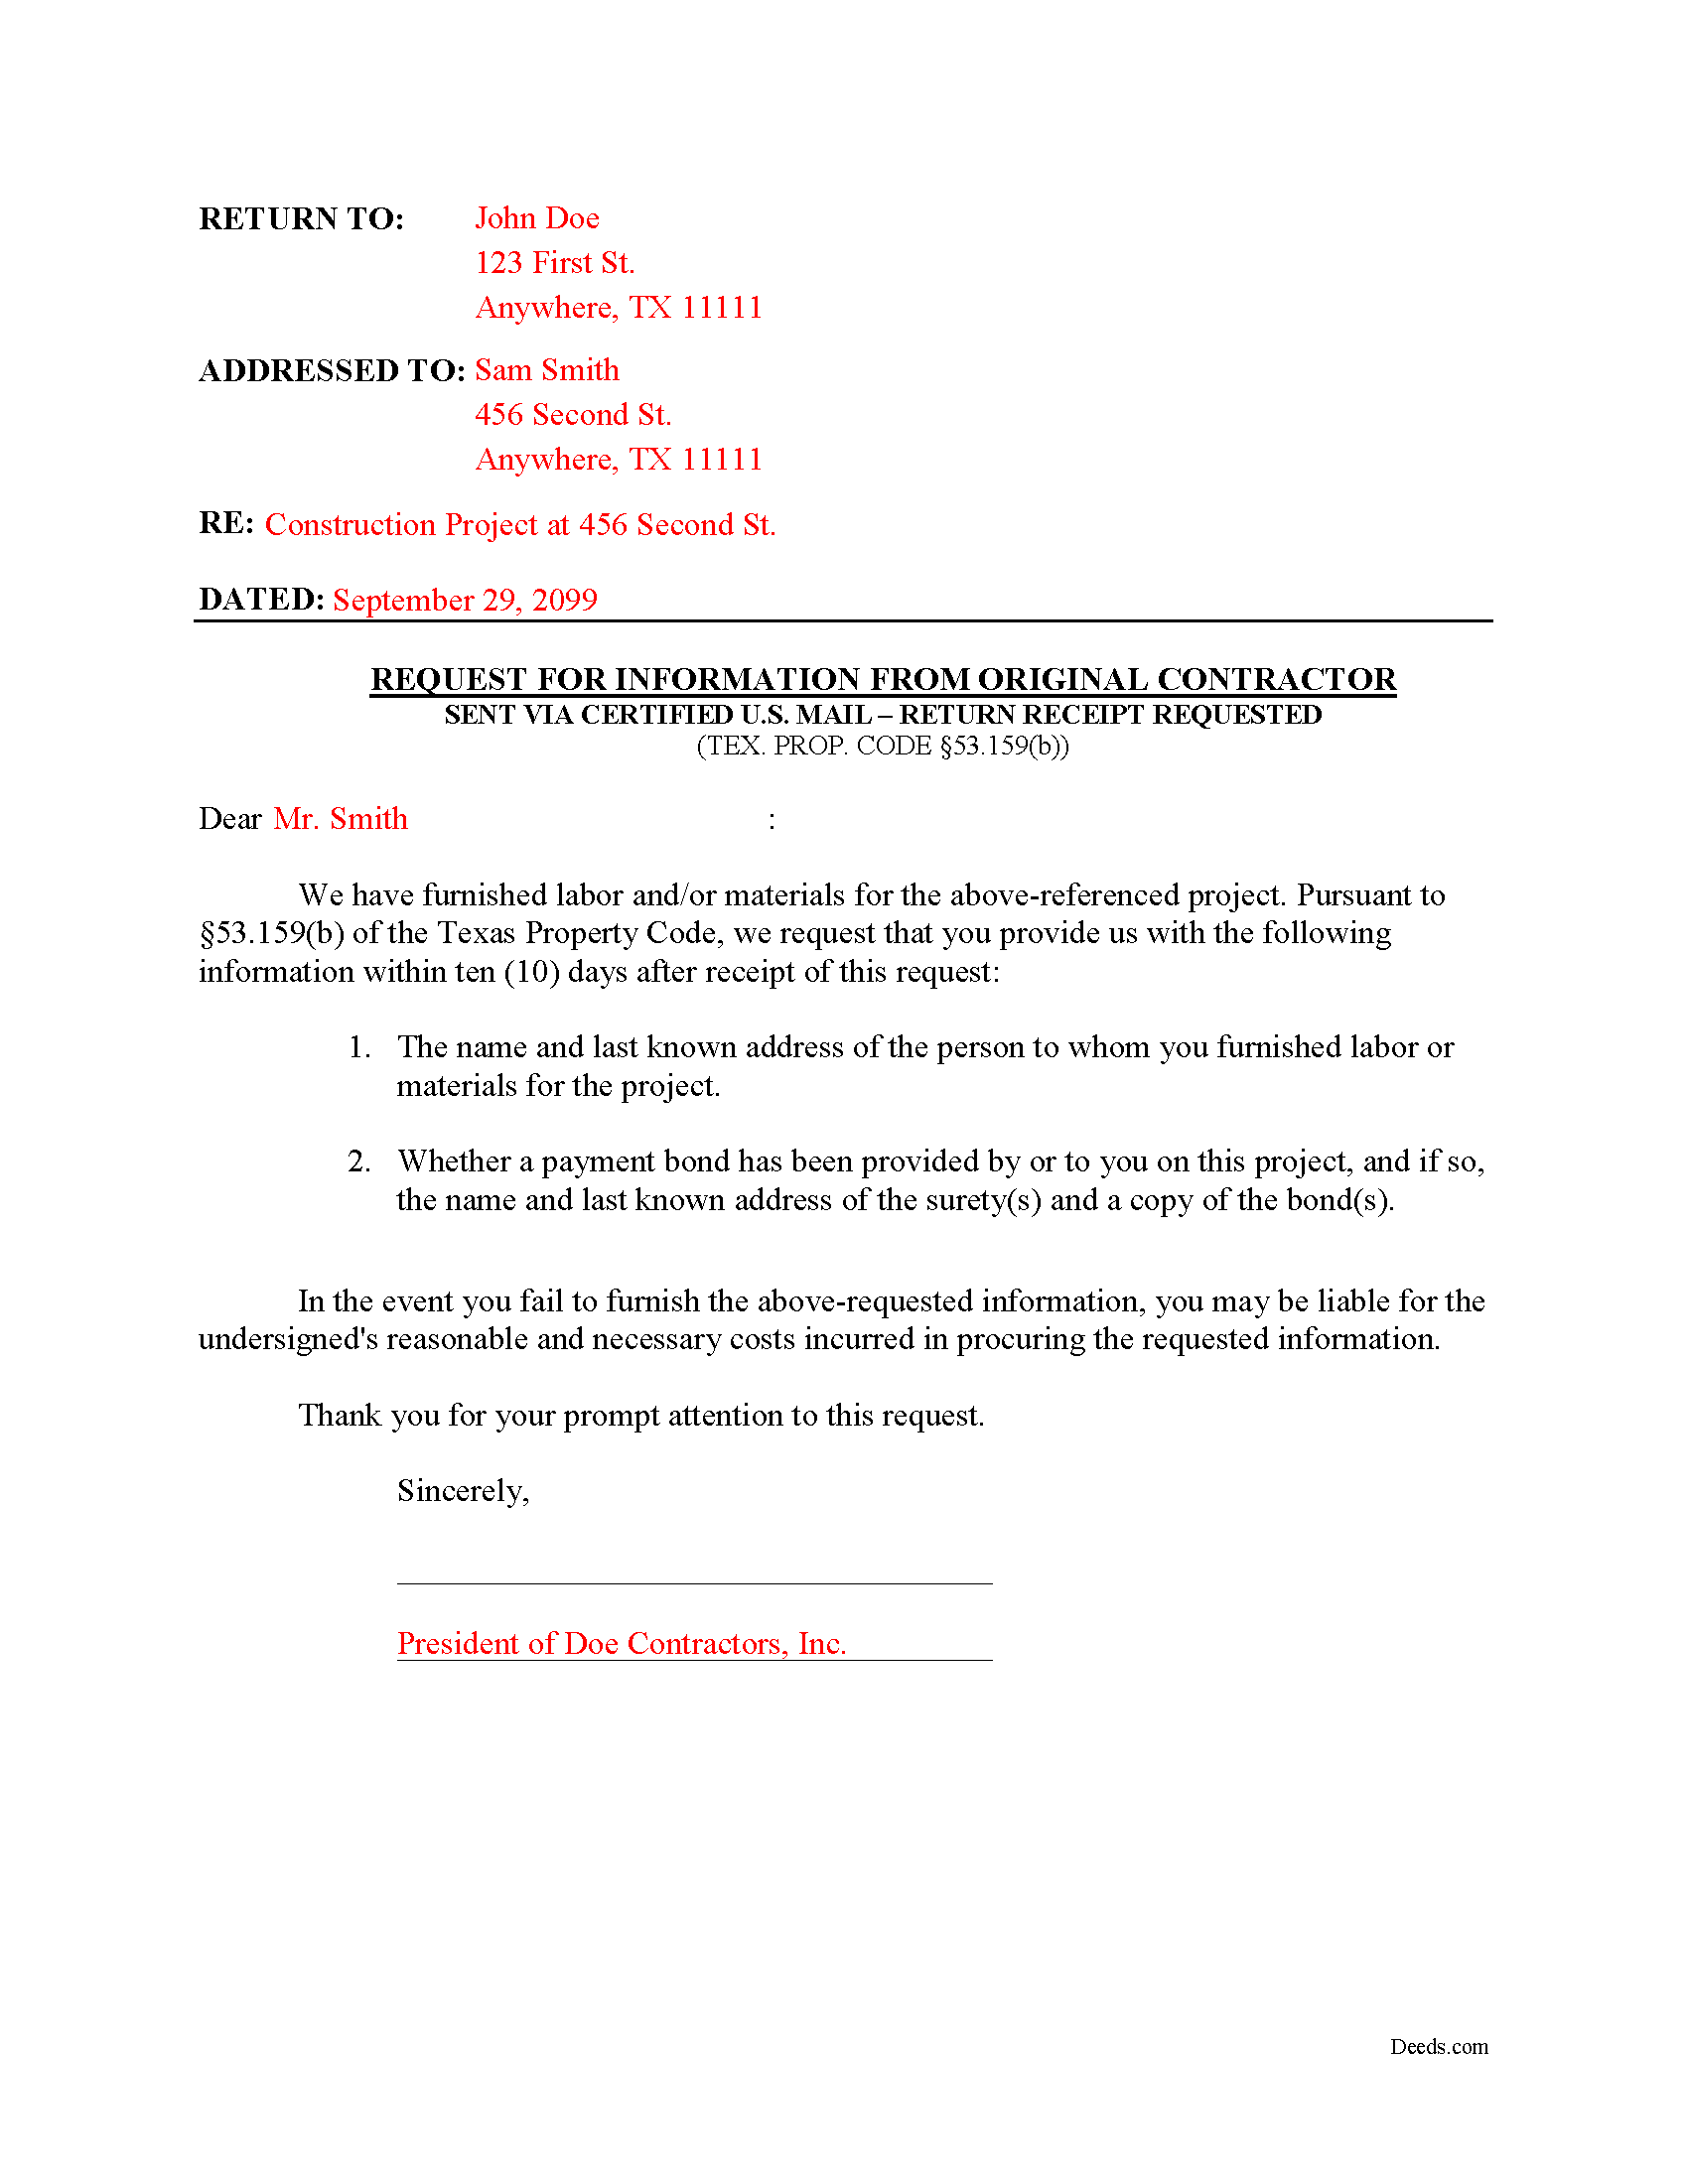 Completed Example of the Request for Infomation from Original Contractor Document